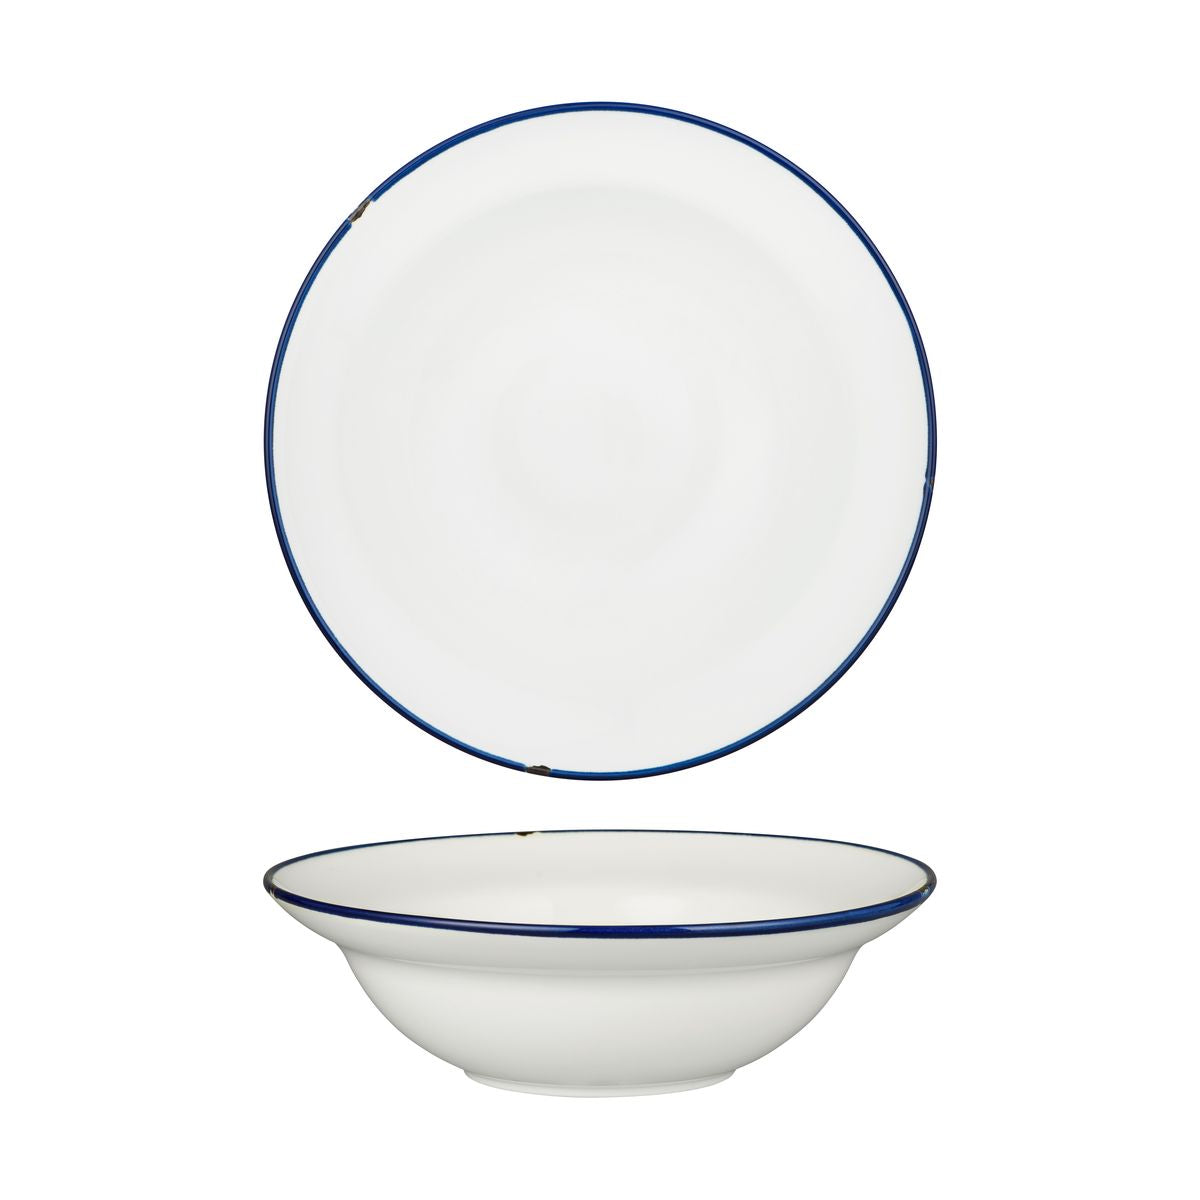 Deep Bowl Plate - 240mm, Tintin White & Navy from Luzerne. made out of Ceramic and sold in boxes of 12. Hospitality quality at wholesale price with The Flying Fork! 